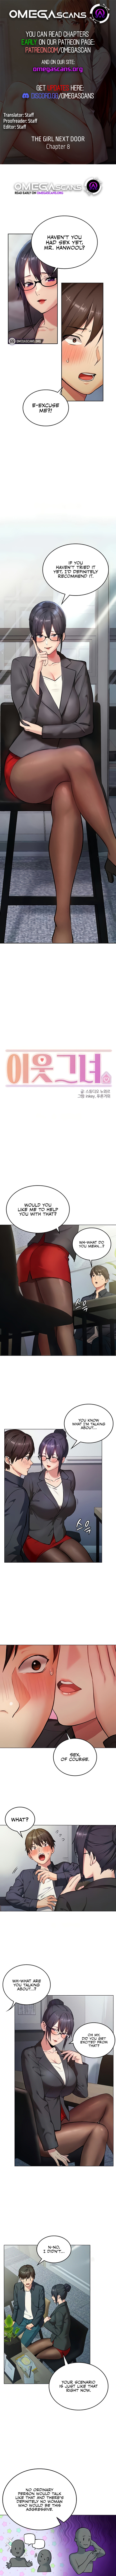 The Girl Next Door - Chapter 8 Page 1